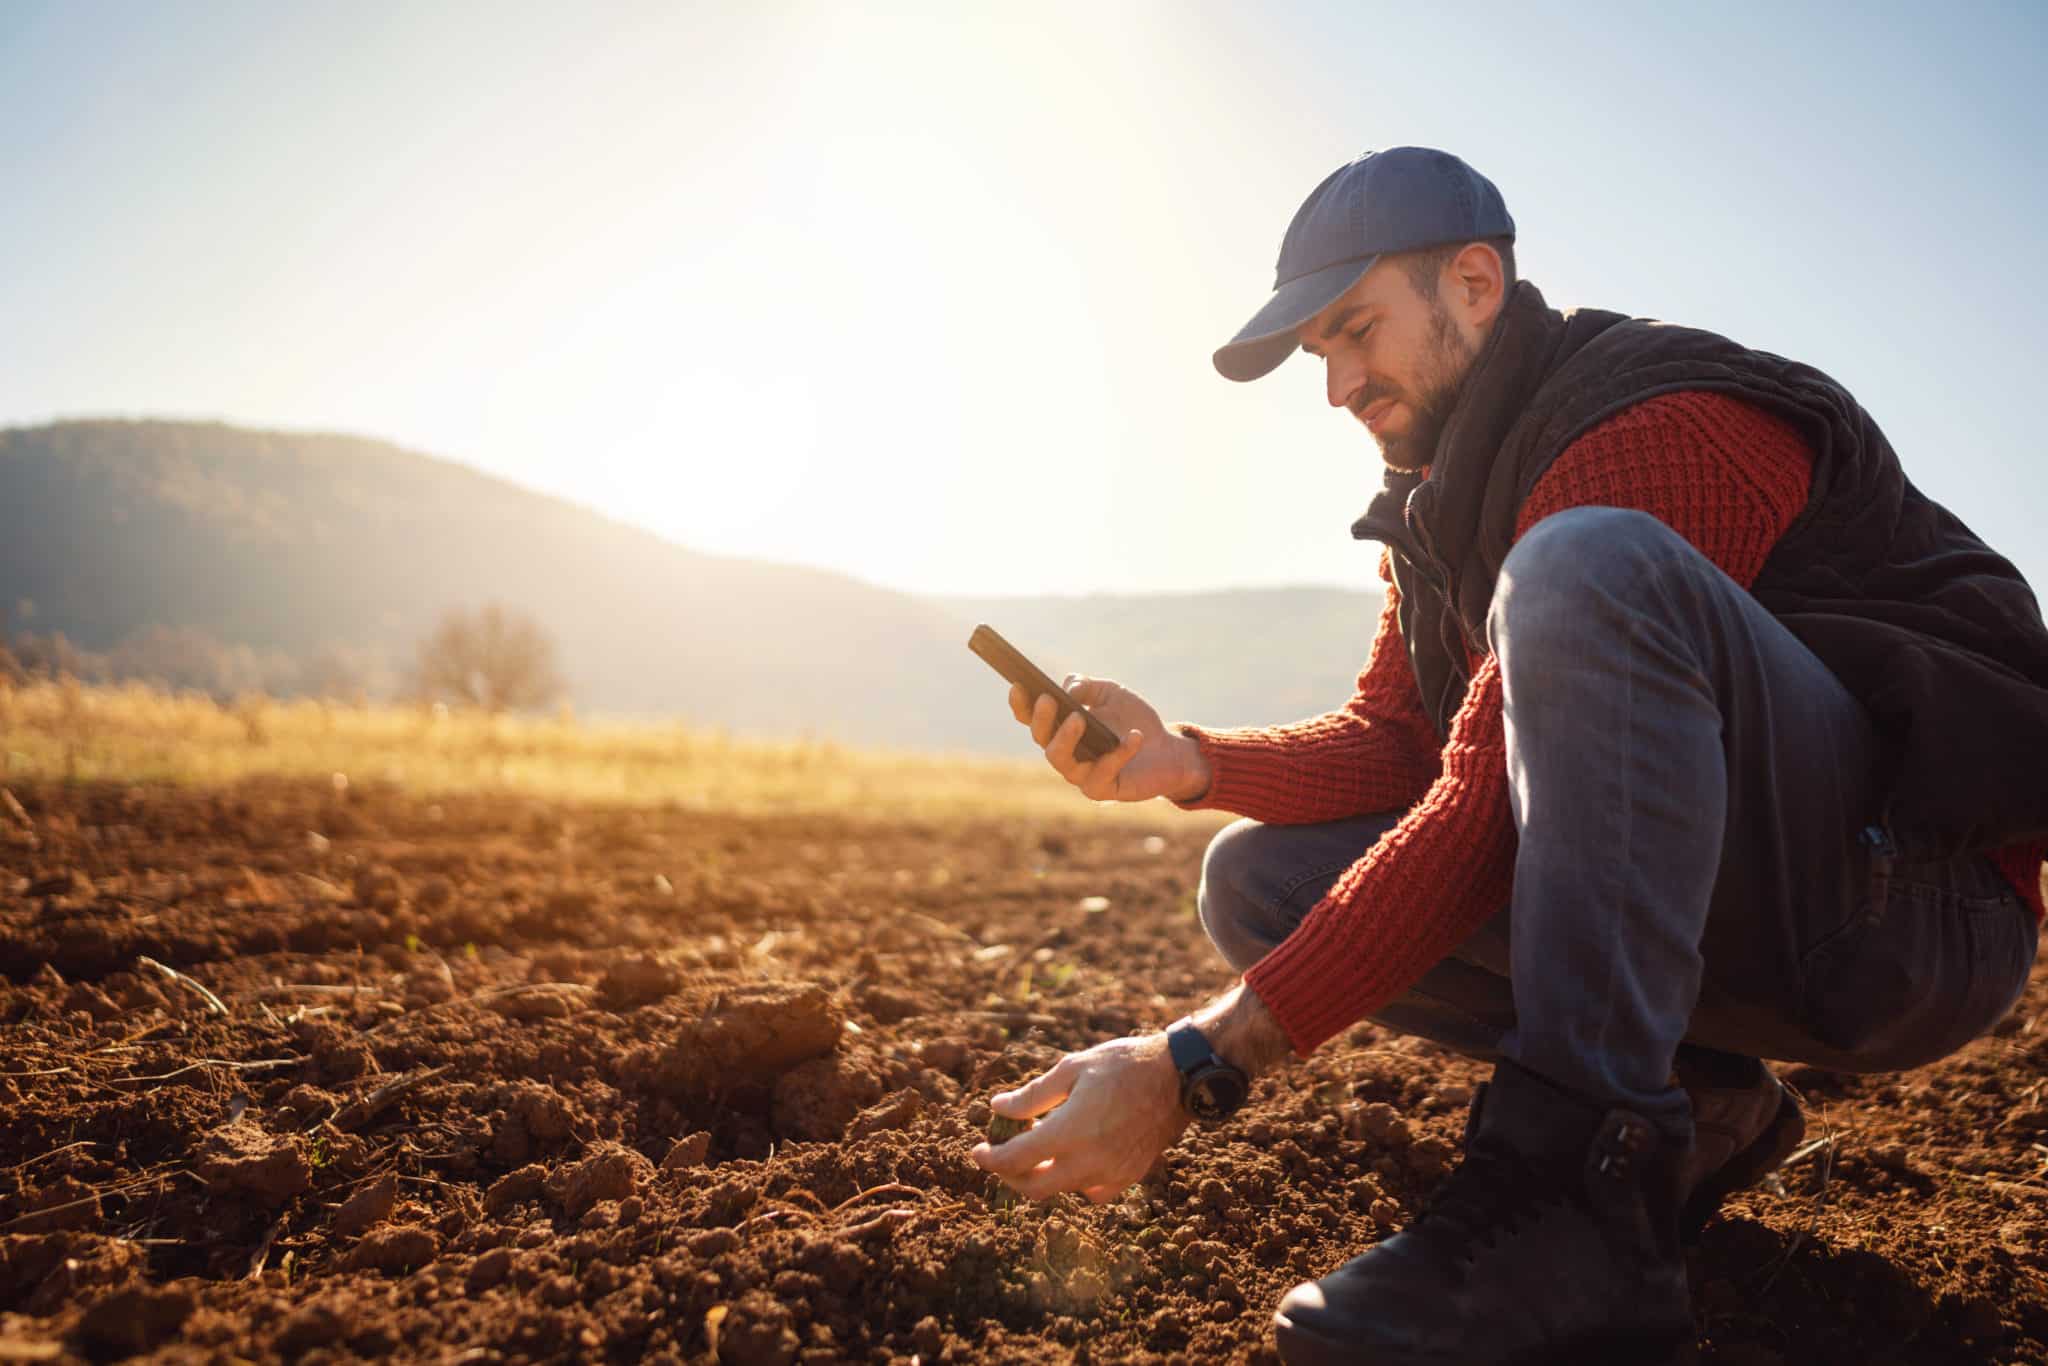 Farmer using his mobile phone while working in the field